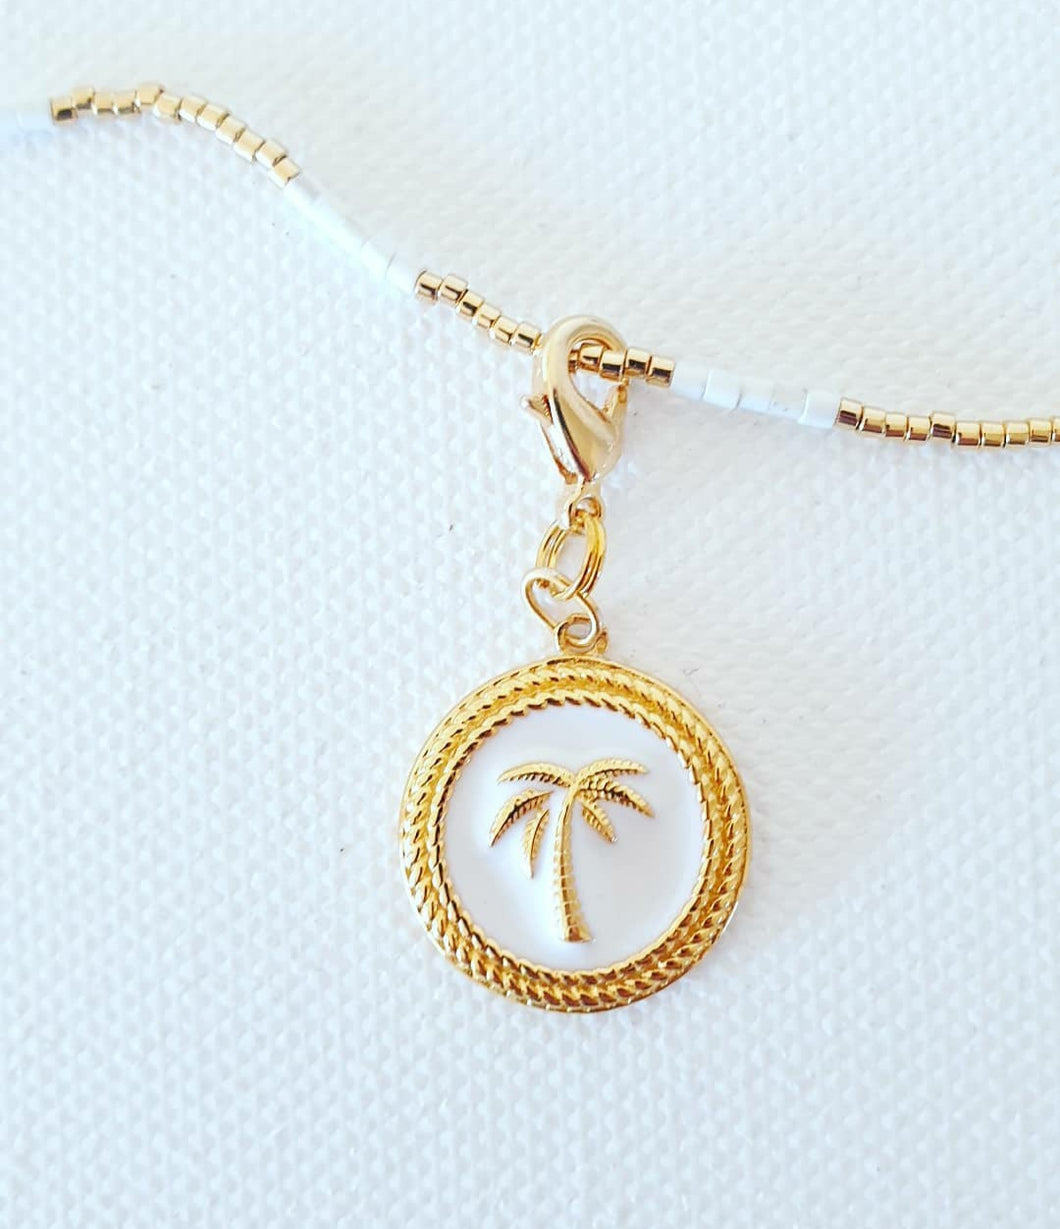 Club Tropicana Pendant with Detachable Lobster Clasp - 24k Gold Plated